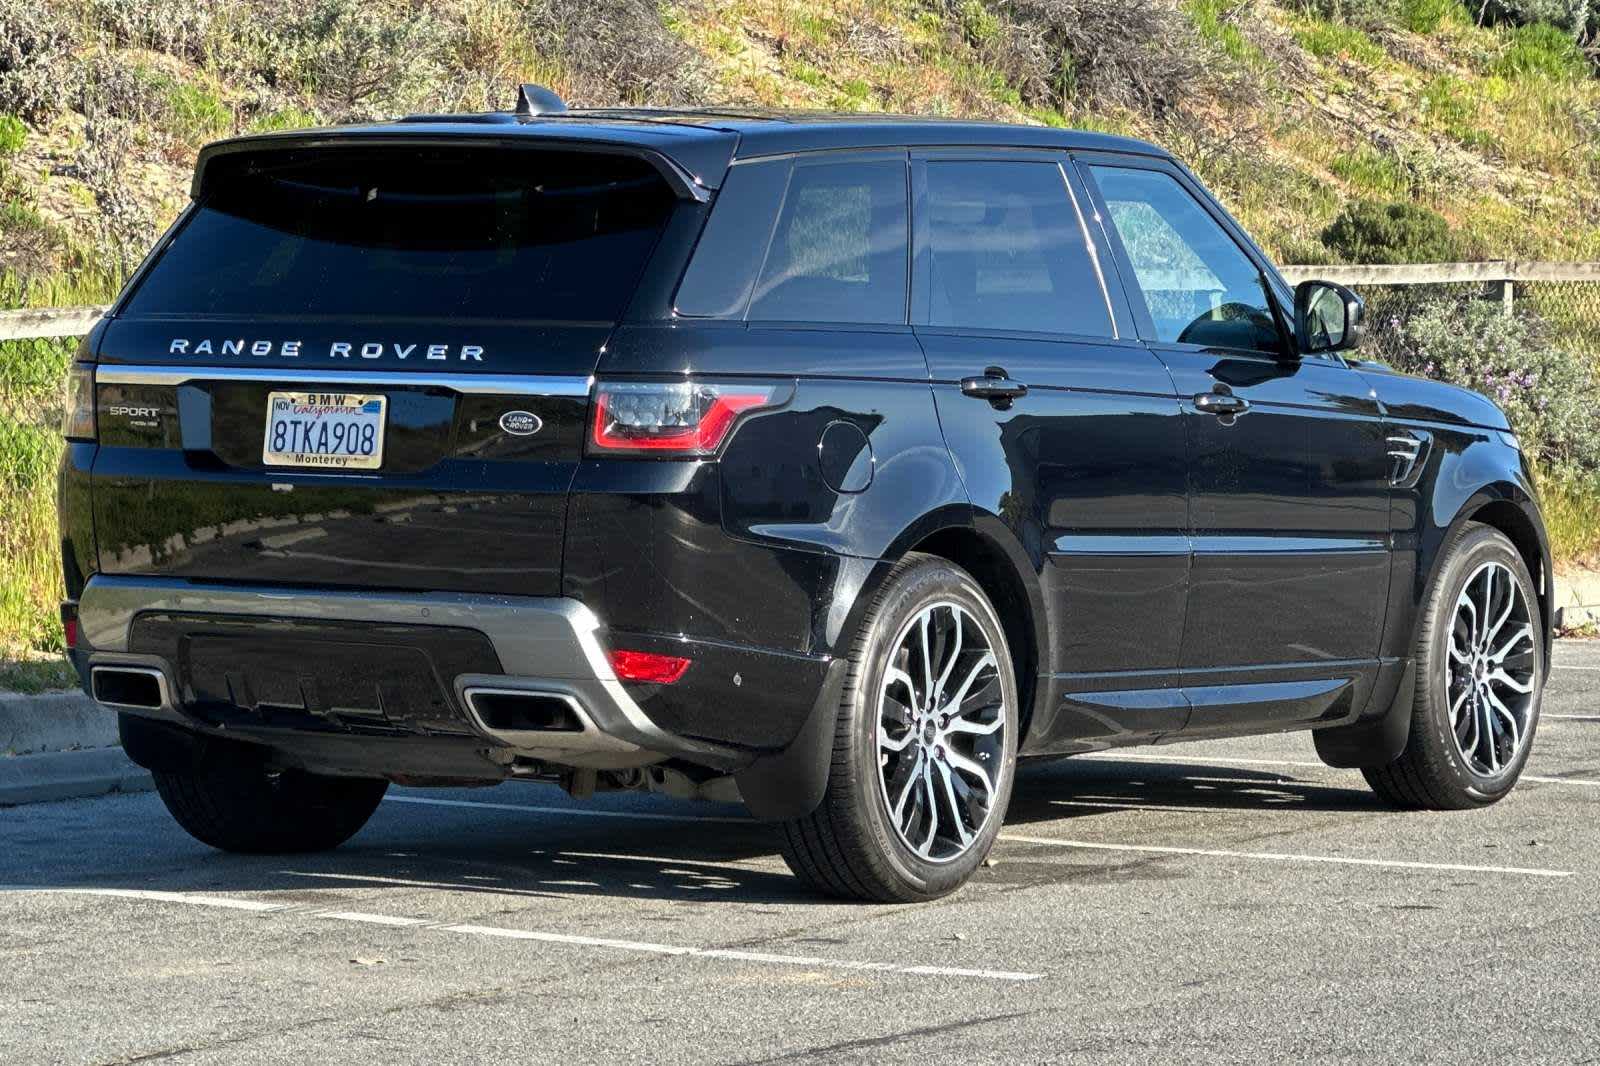 Used 2020 Land Rover Range Rover Sport HSE with VIN SALWR2RYXLA749061 for sale in Seaside, CA